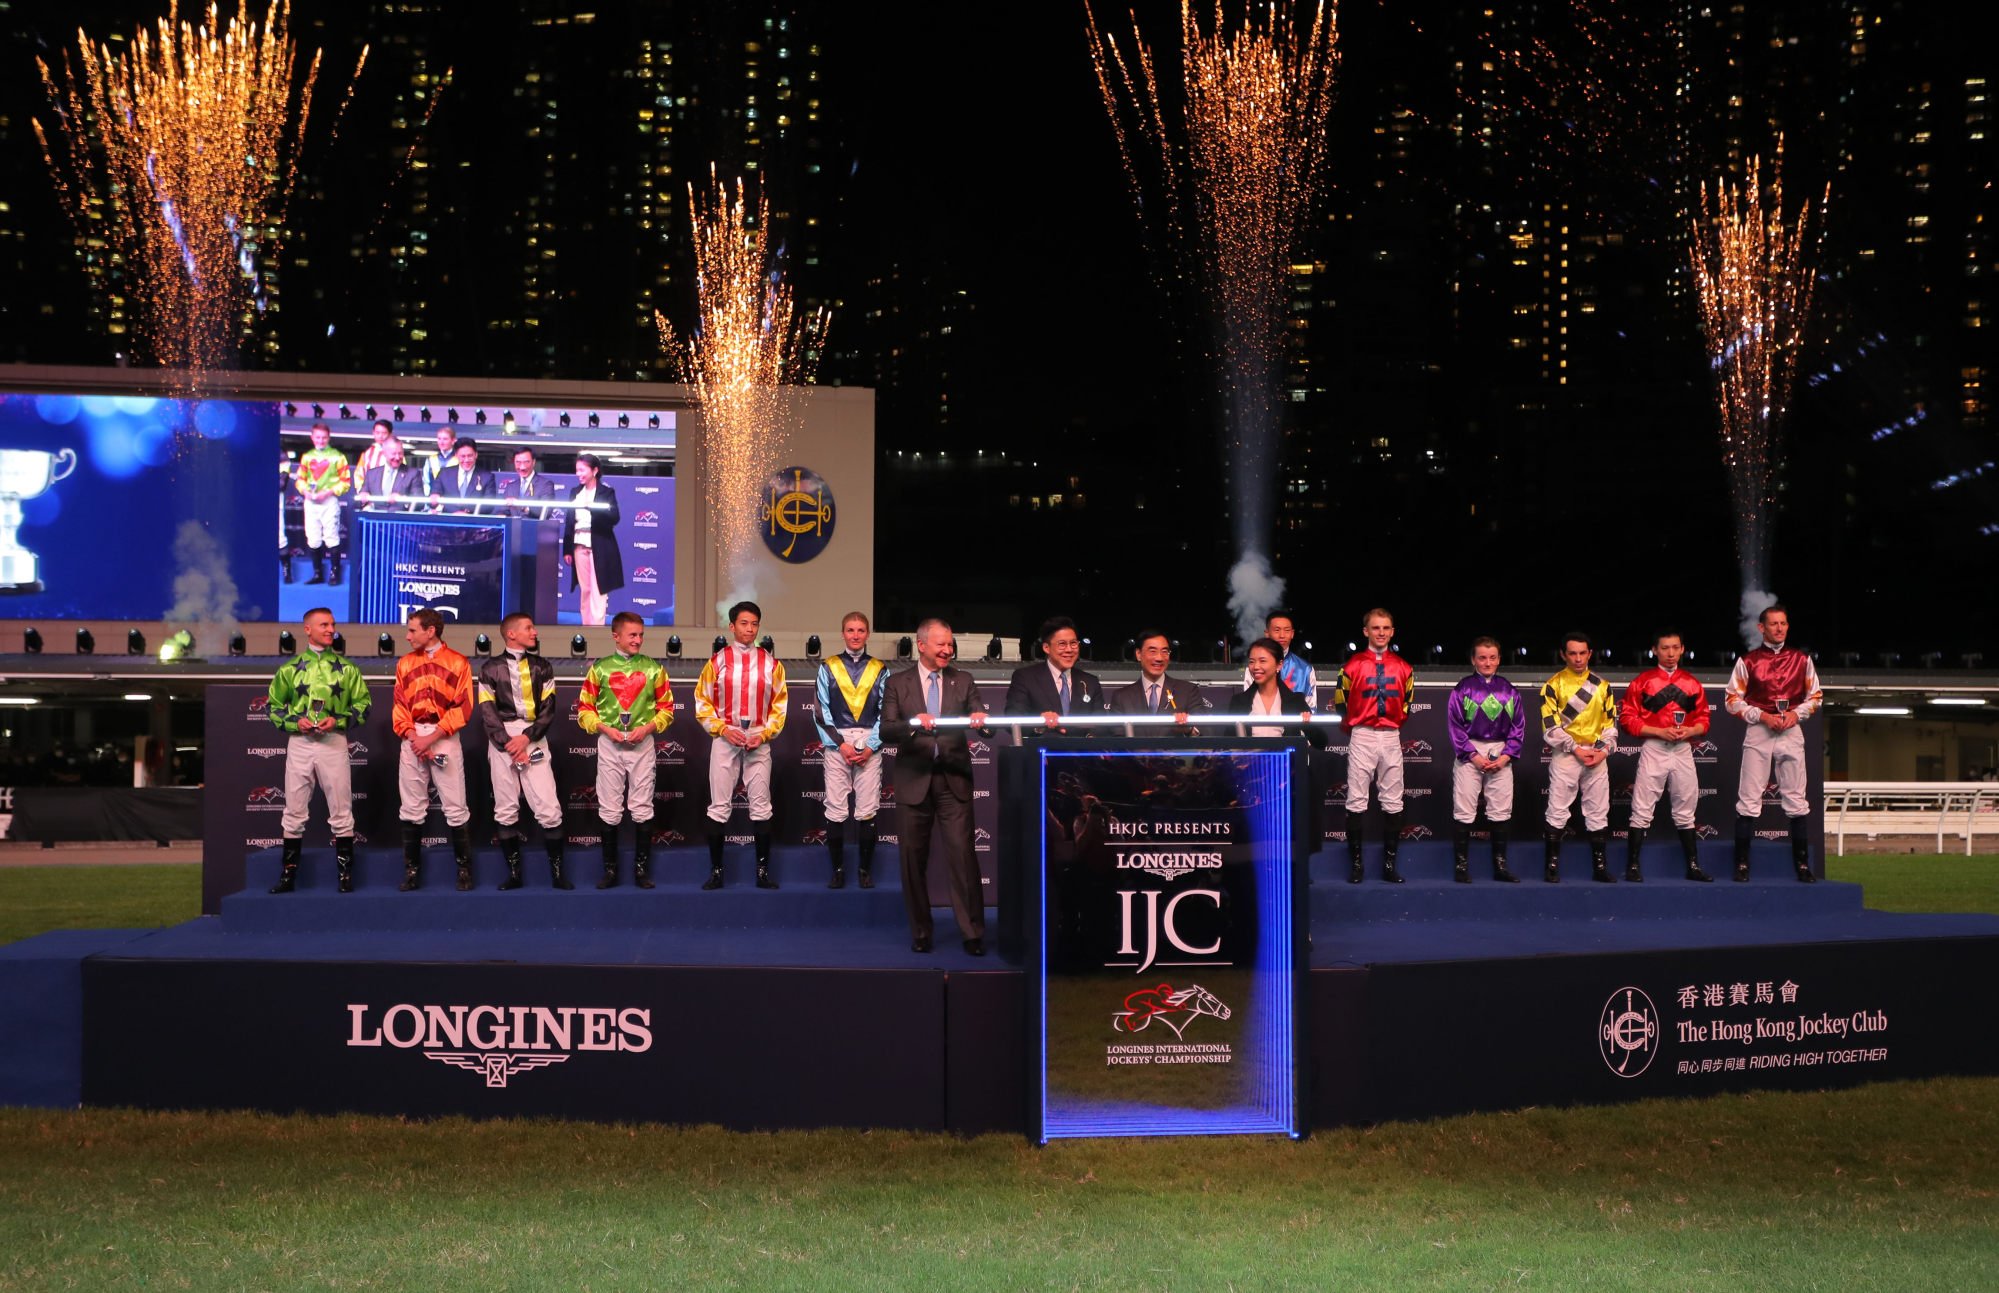 The opening ceremony of Wednesday night’s IJC at Happy Valley.